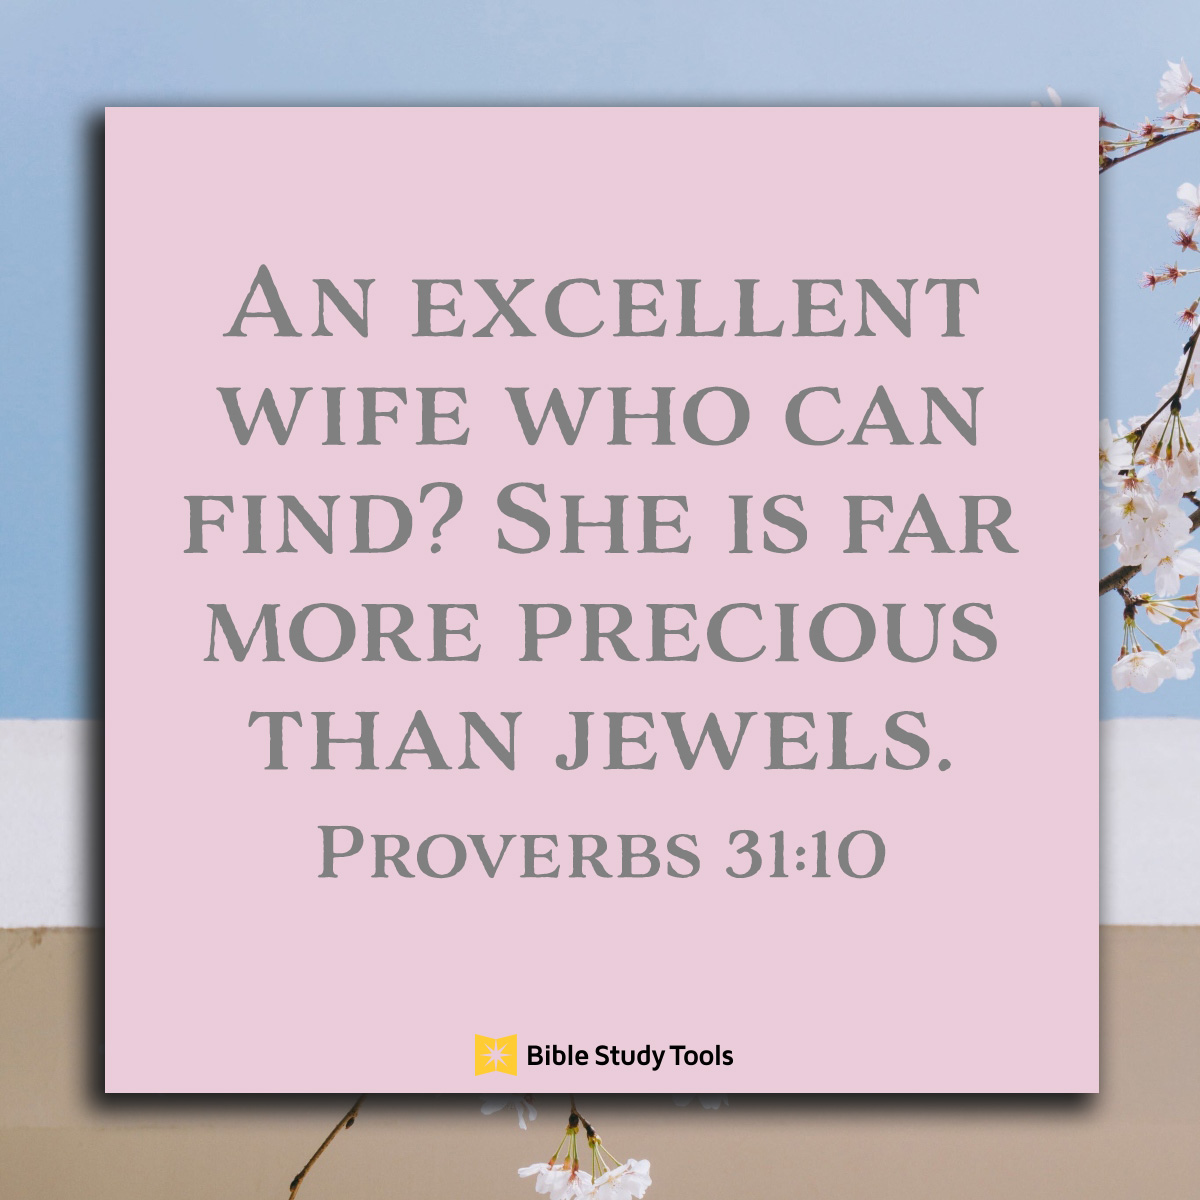 Proverbs 31:10, inspirational image